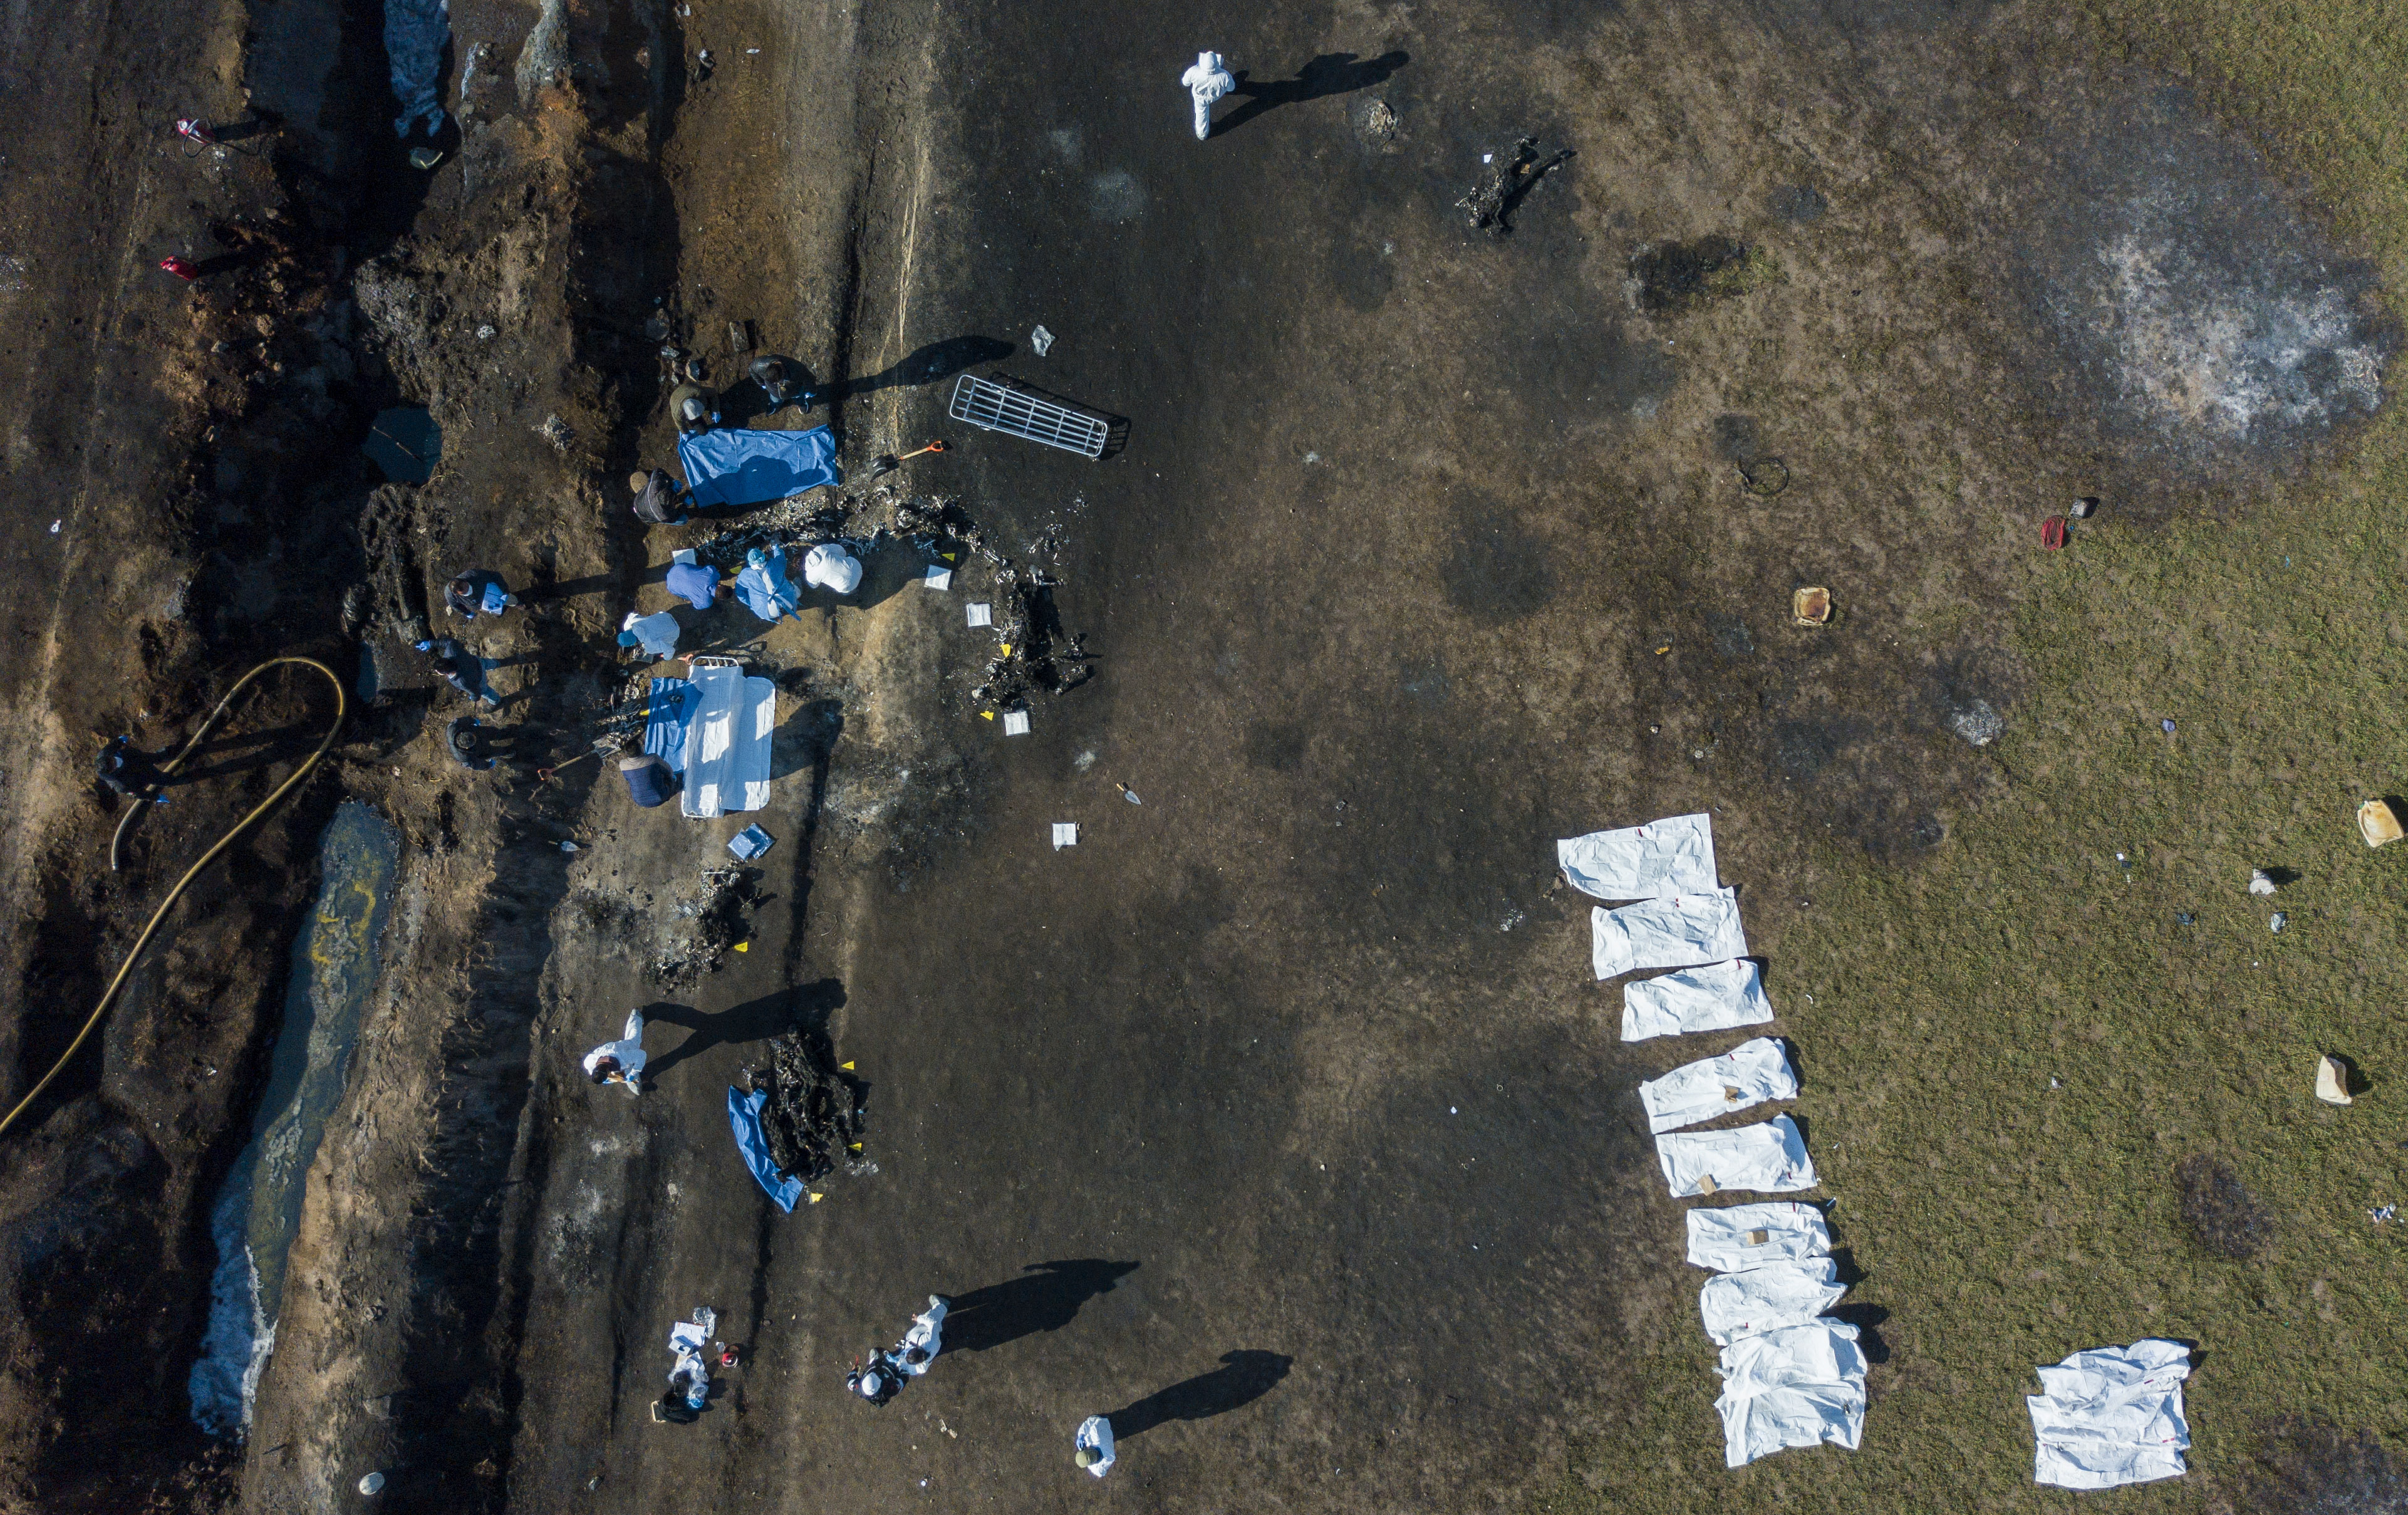 TOPSHOT - EDITORS NOTE: Graphic content / Aerial view of the scene where a massive blaze trigerred by a leaky pipeline took place the night before in Tlahuelilpan, Hidalgo state, Mexico on January 19, 2019. - An explosion and fire has killed at least 66 people who were collecting fuel gushing from a leaking pipeline in central Mexico, the Hidalgo state governor said on Saturday. (Photo by ALFREDO ESTRELLA / AFP) (Photo credit should read ALFREDO ESTRELLA/AFP/Getty Images)